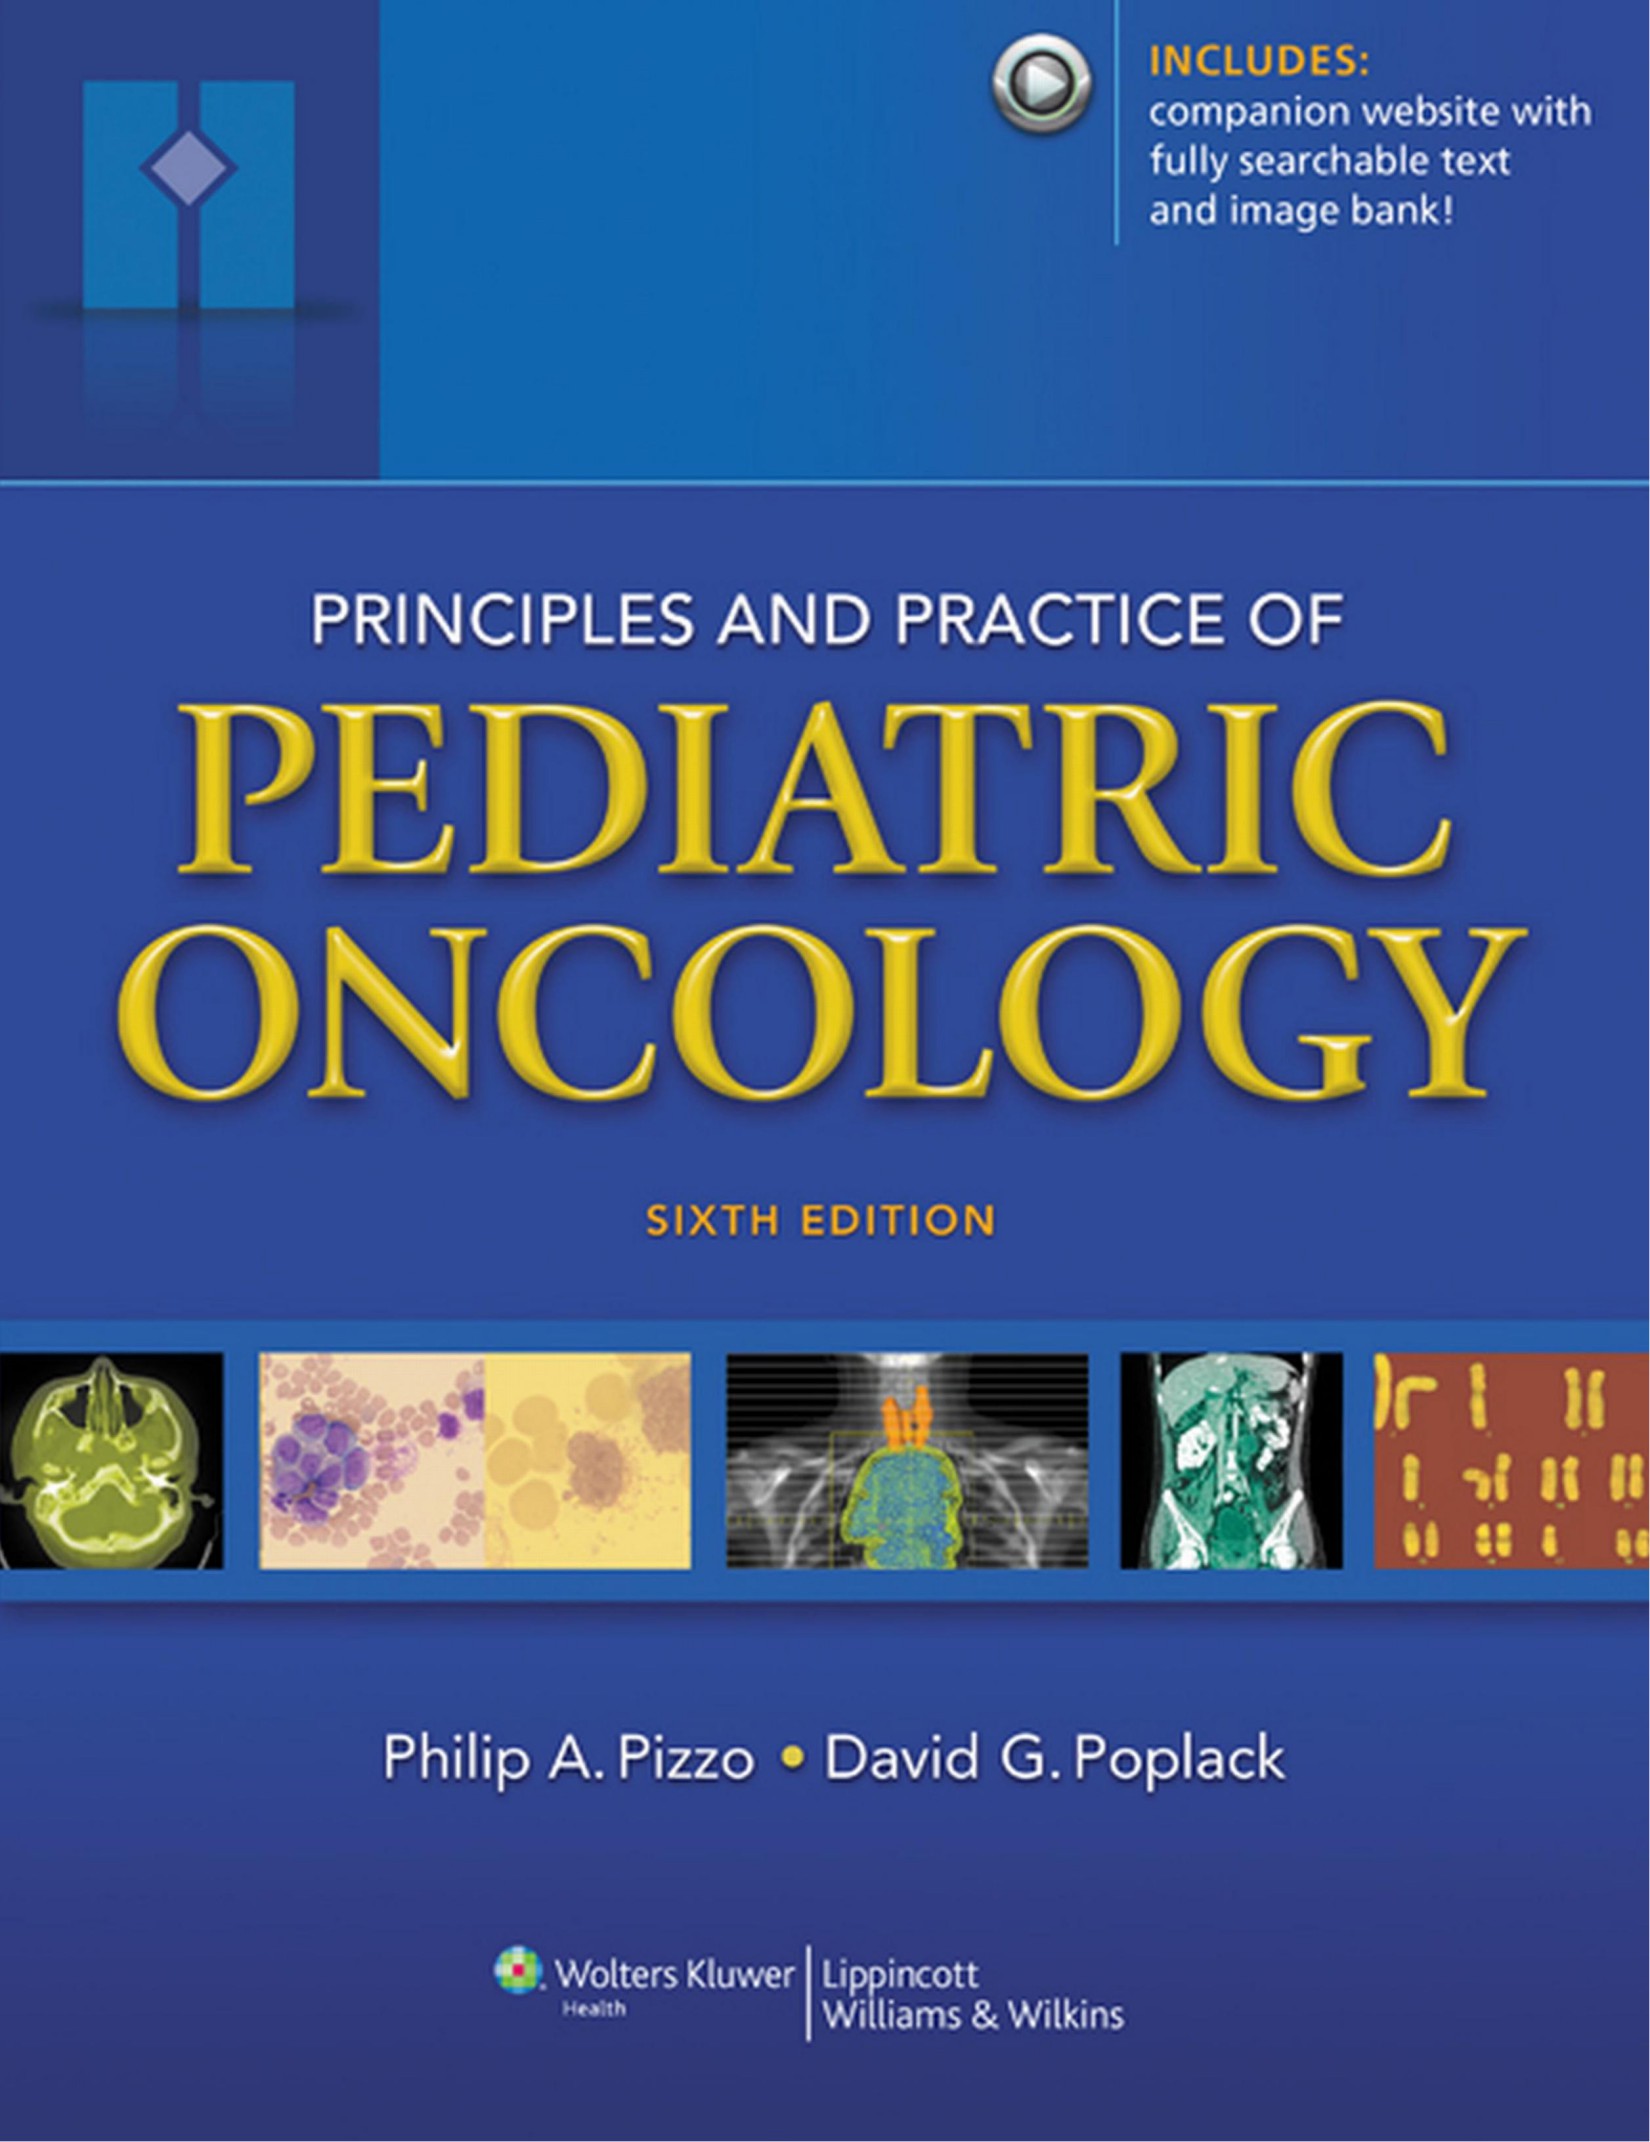 Principles and Practice of Pediatric Oncology, 6th Edition.jpg